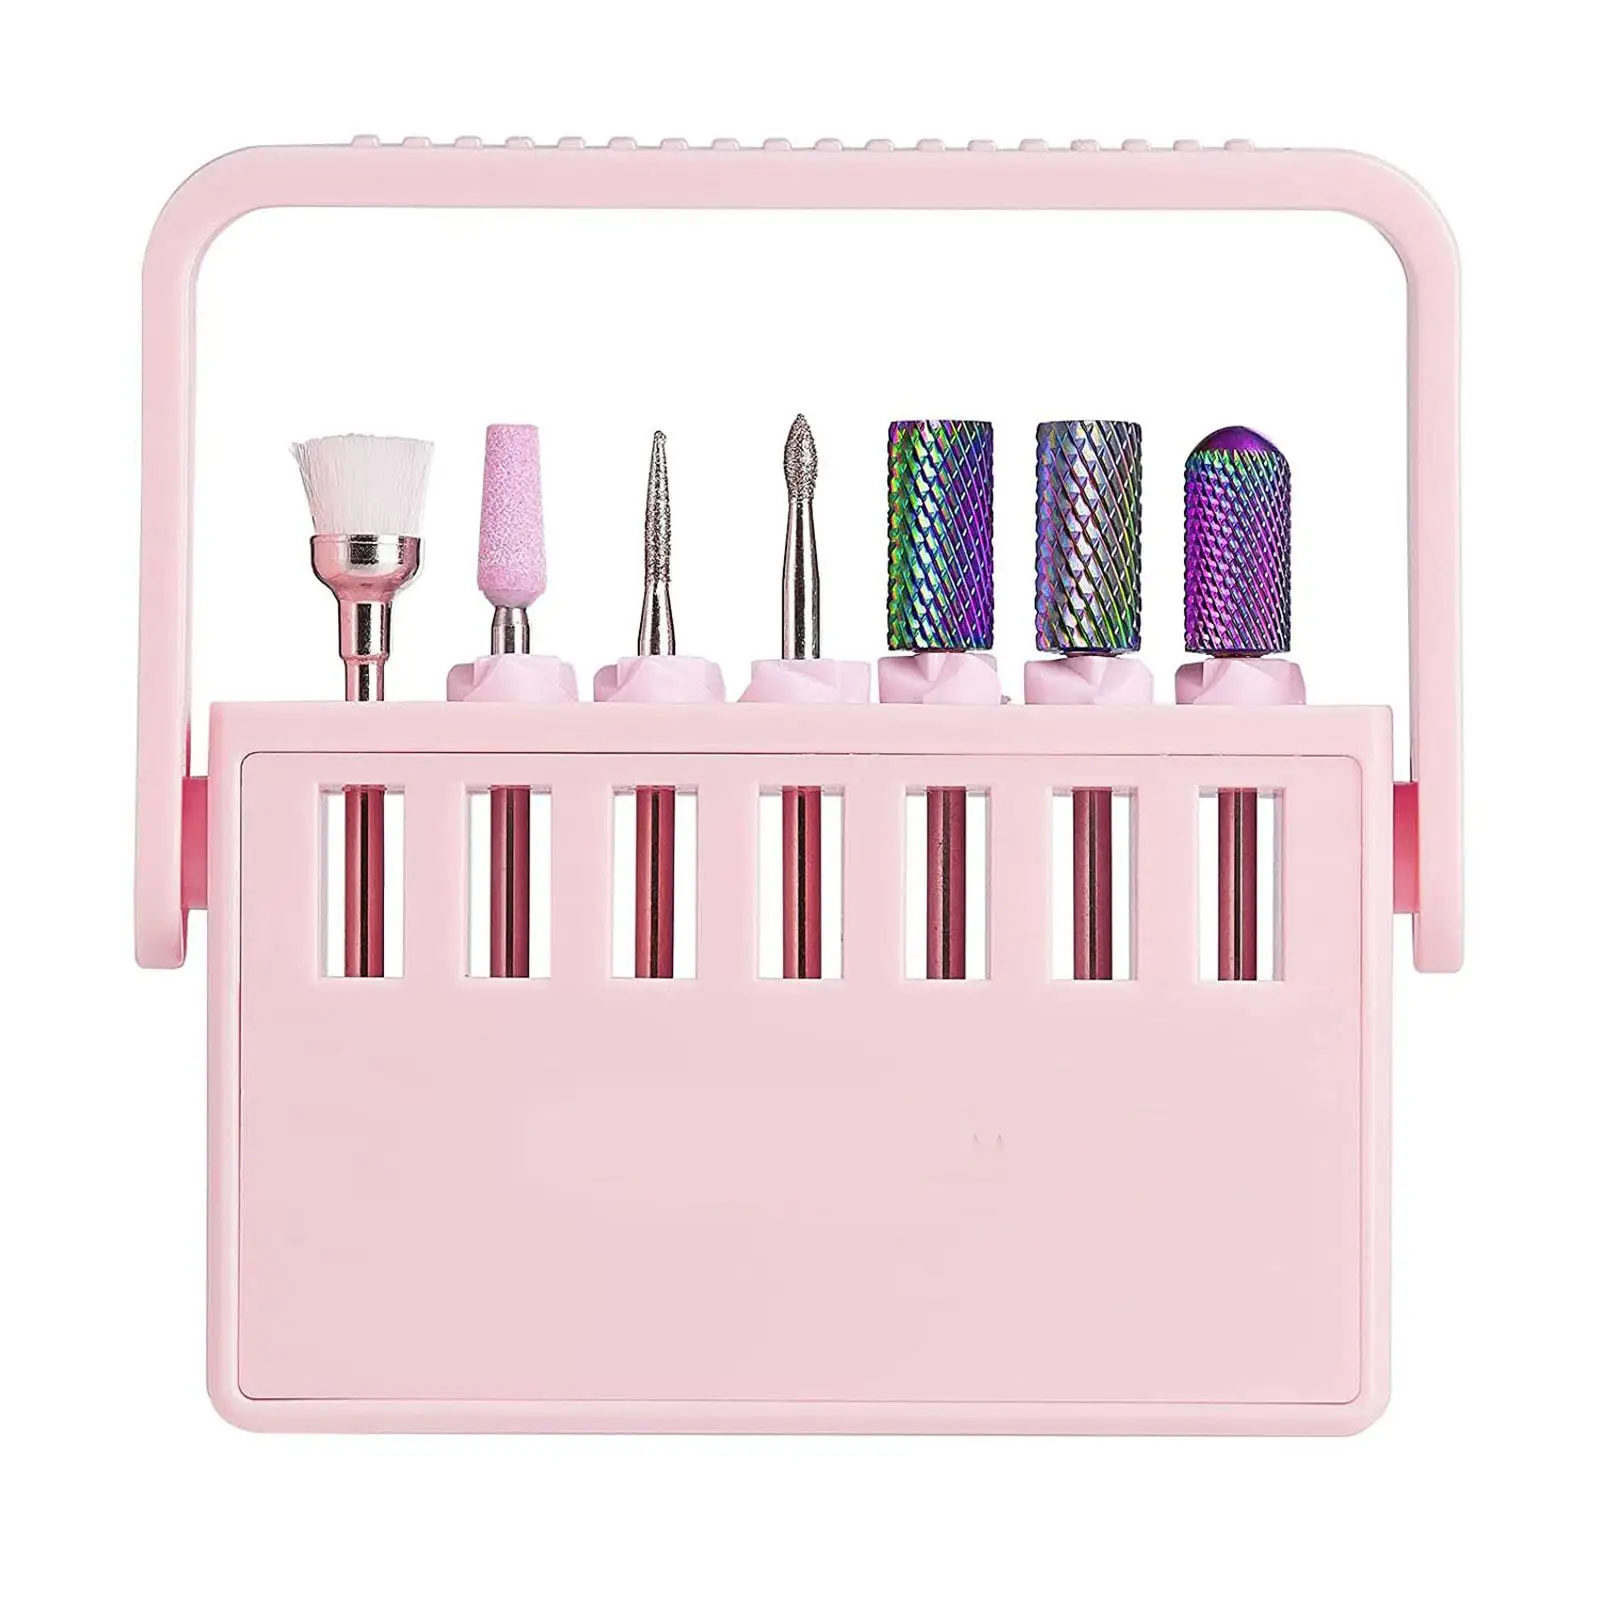 Nail Drill Bits Holder Mini Adjustable Detachable Stand Container for Home